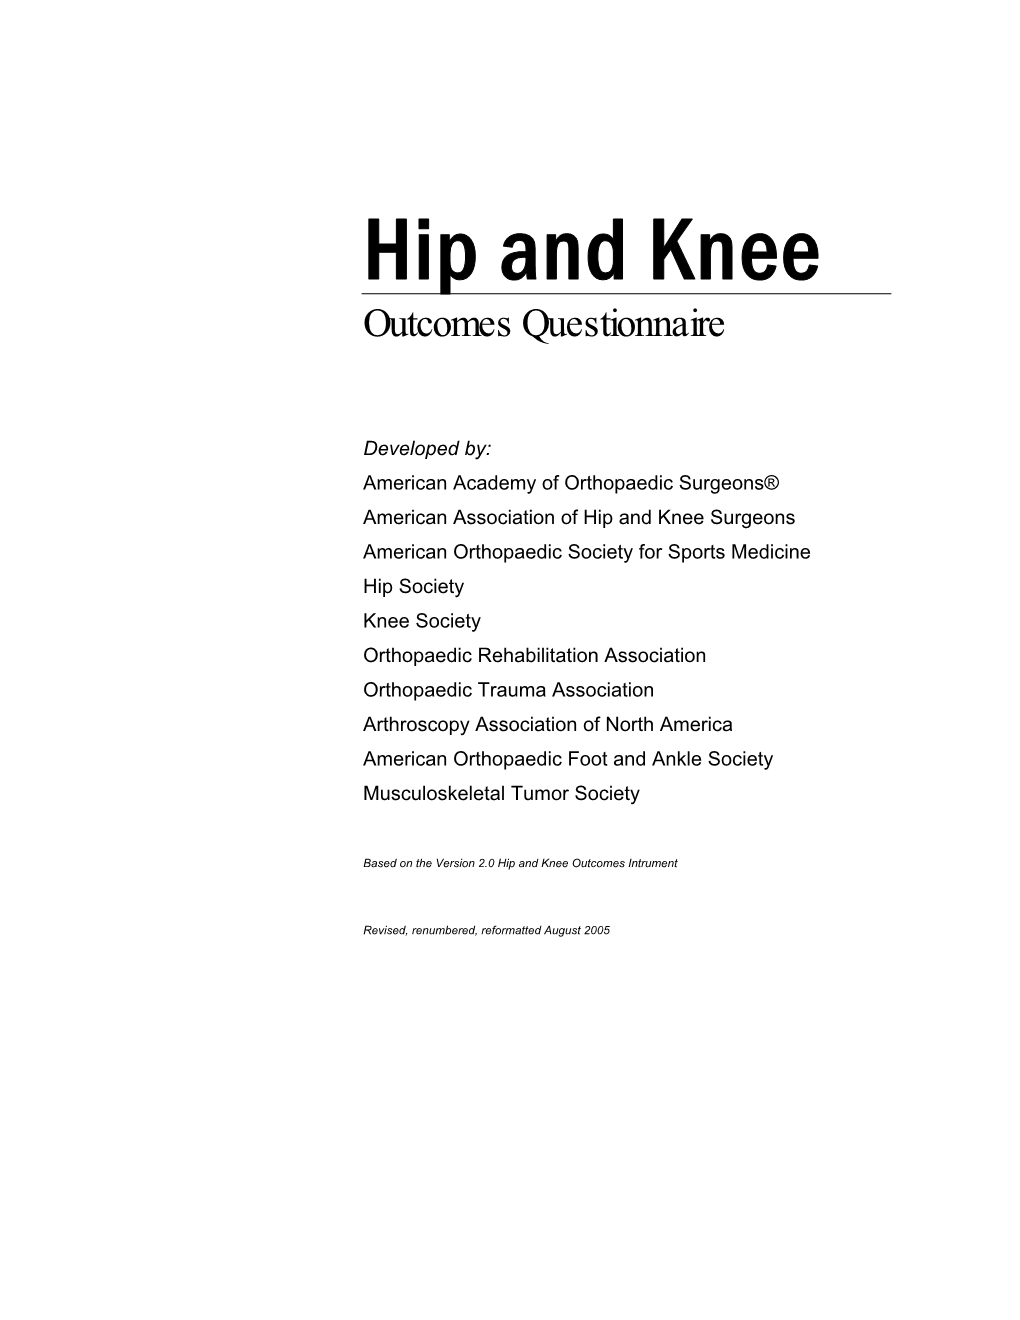 Hip and Knee Outcomes Questionnaires